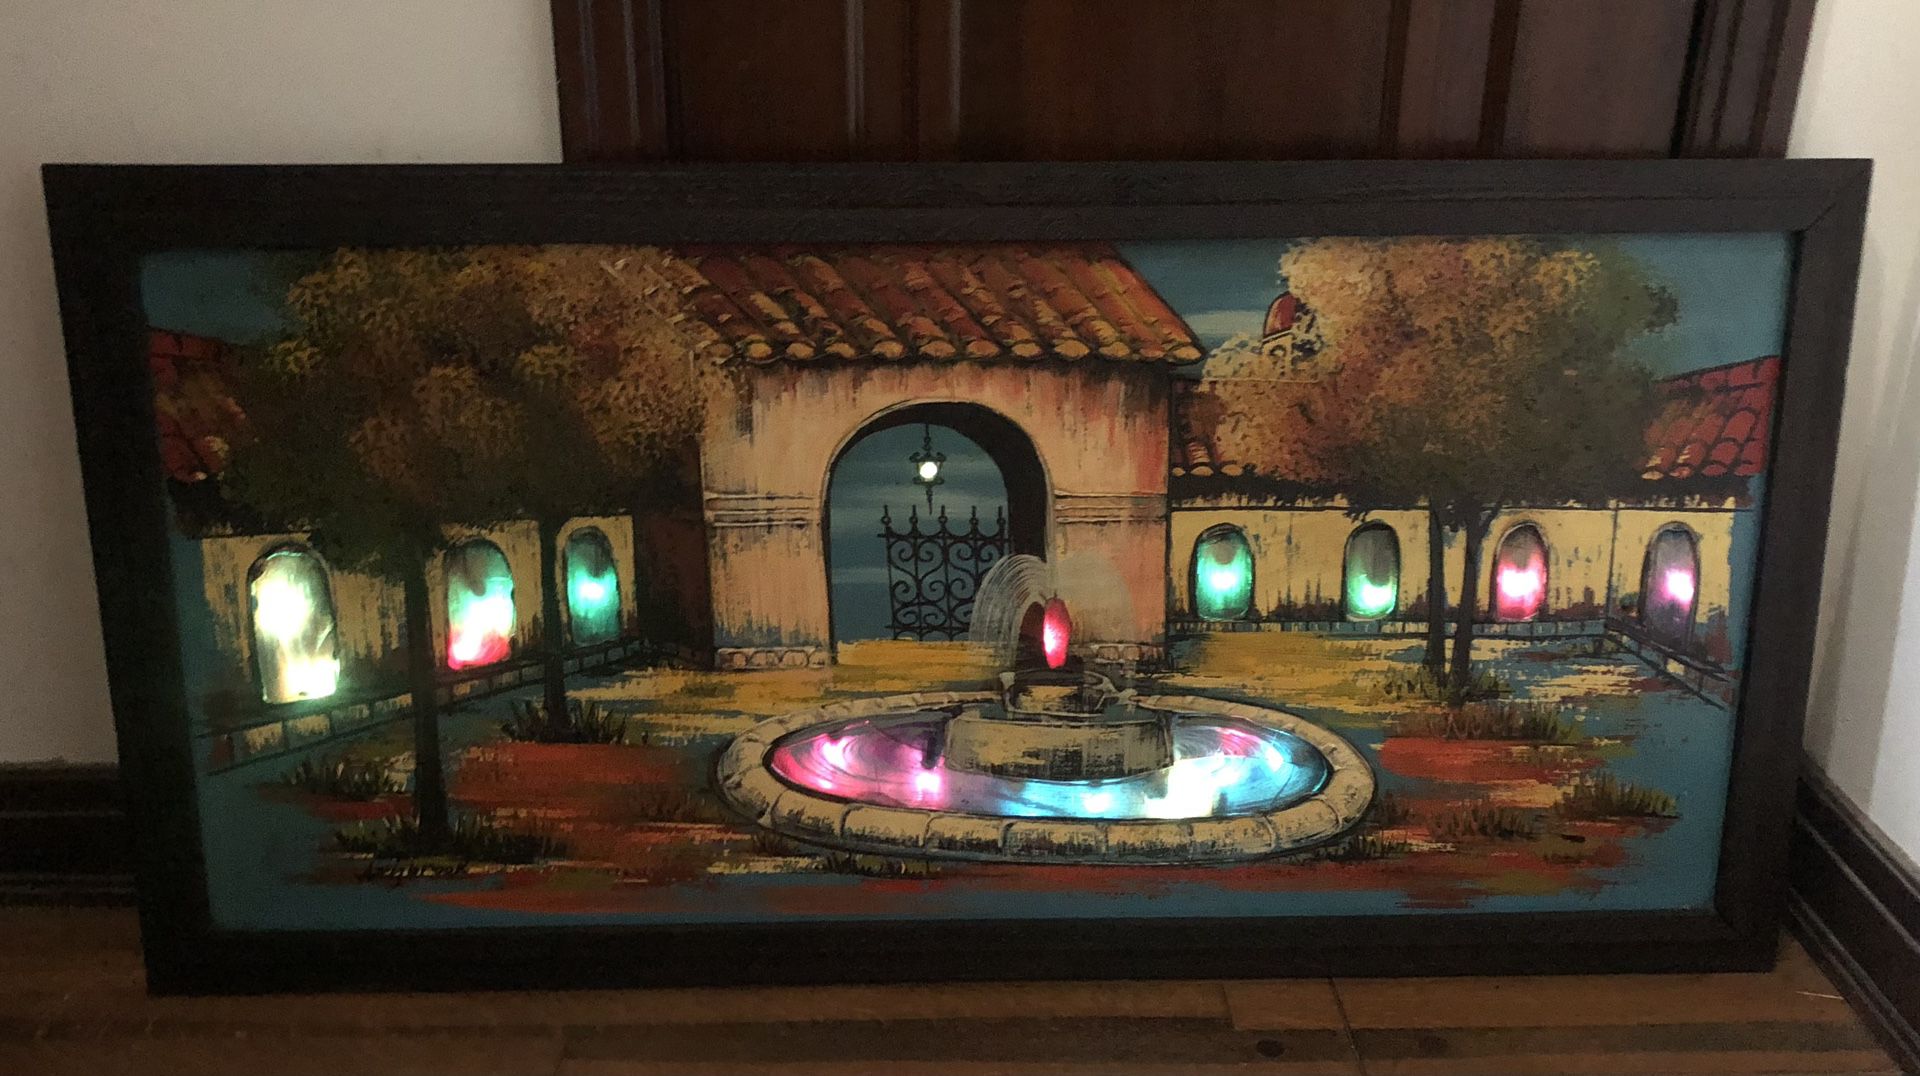 Vintage Tuscan house with water fountain Lighted Painting Ashbrook Studios - 43x21” 